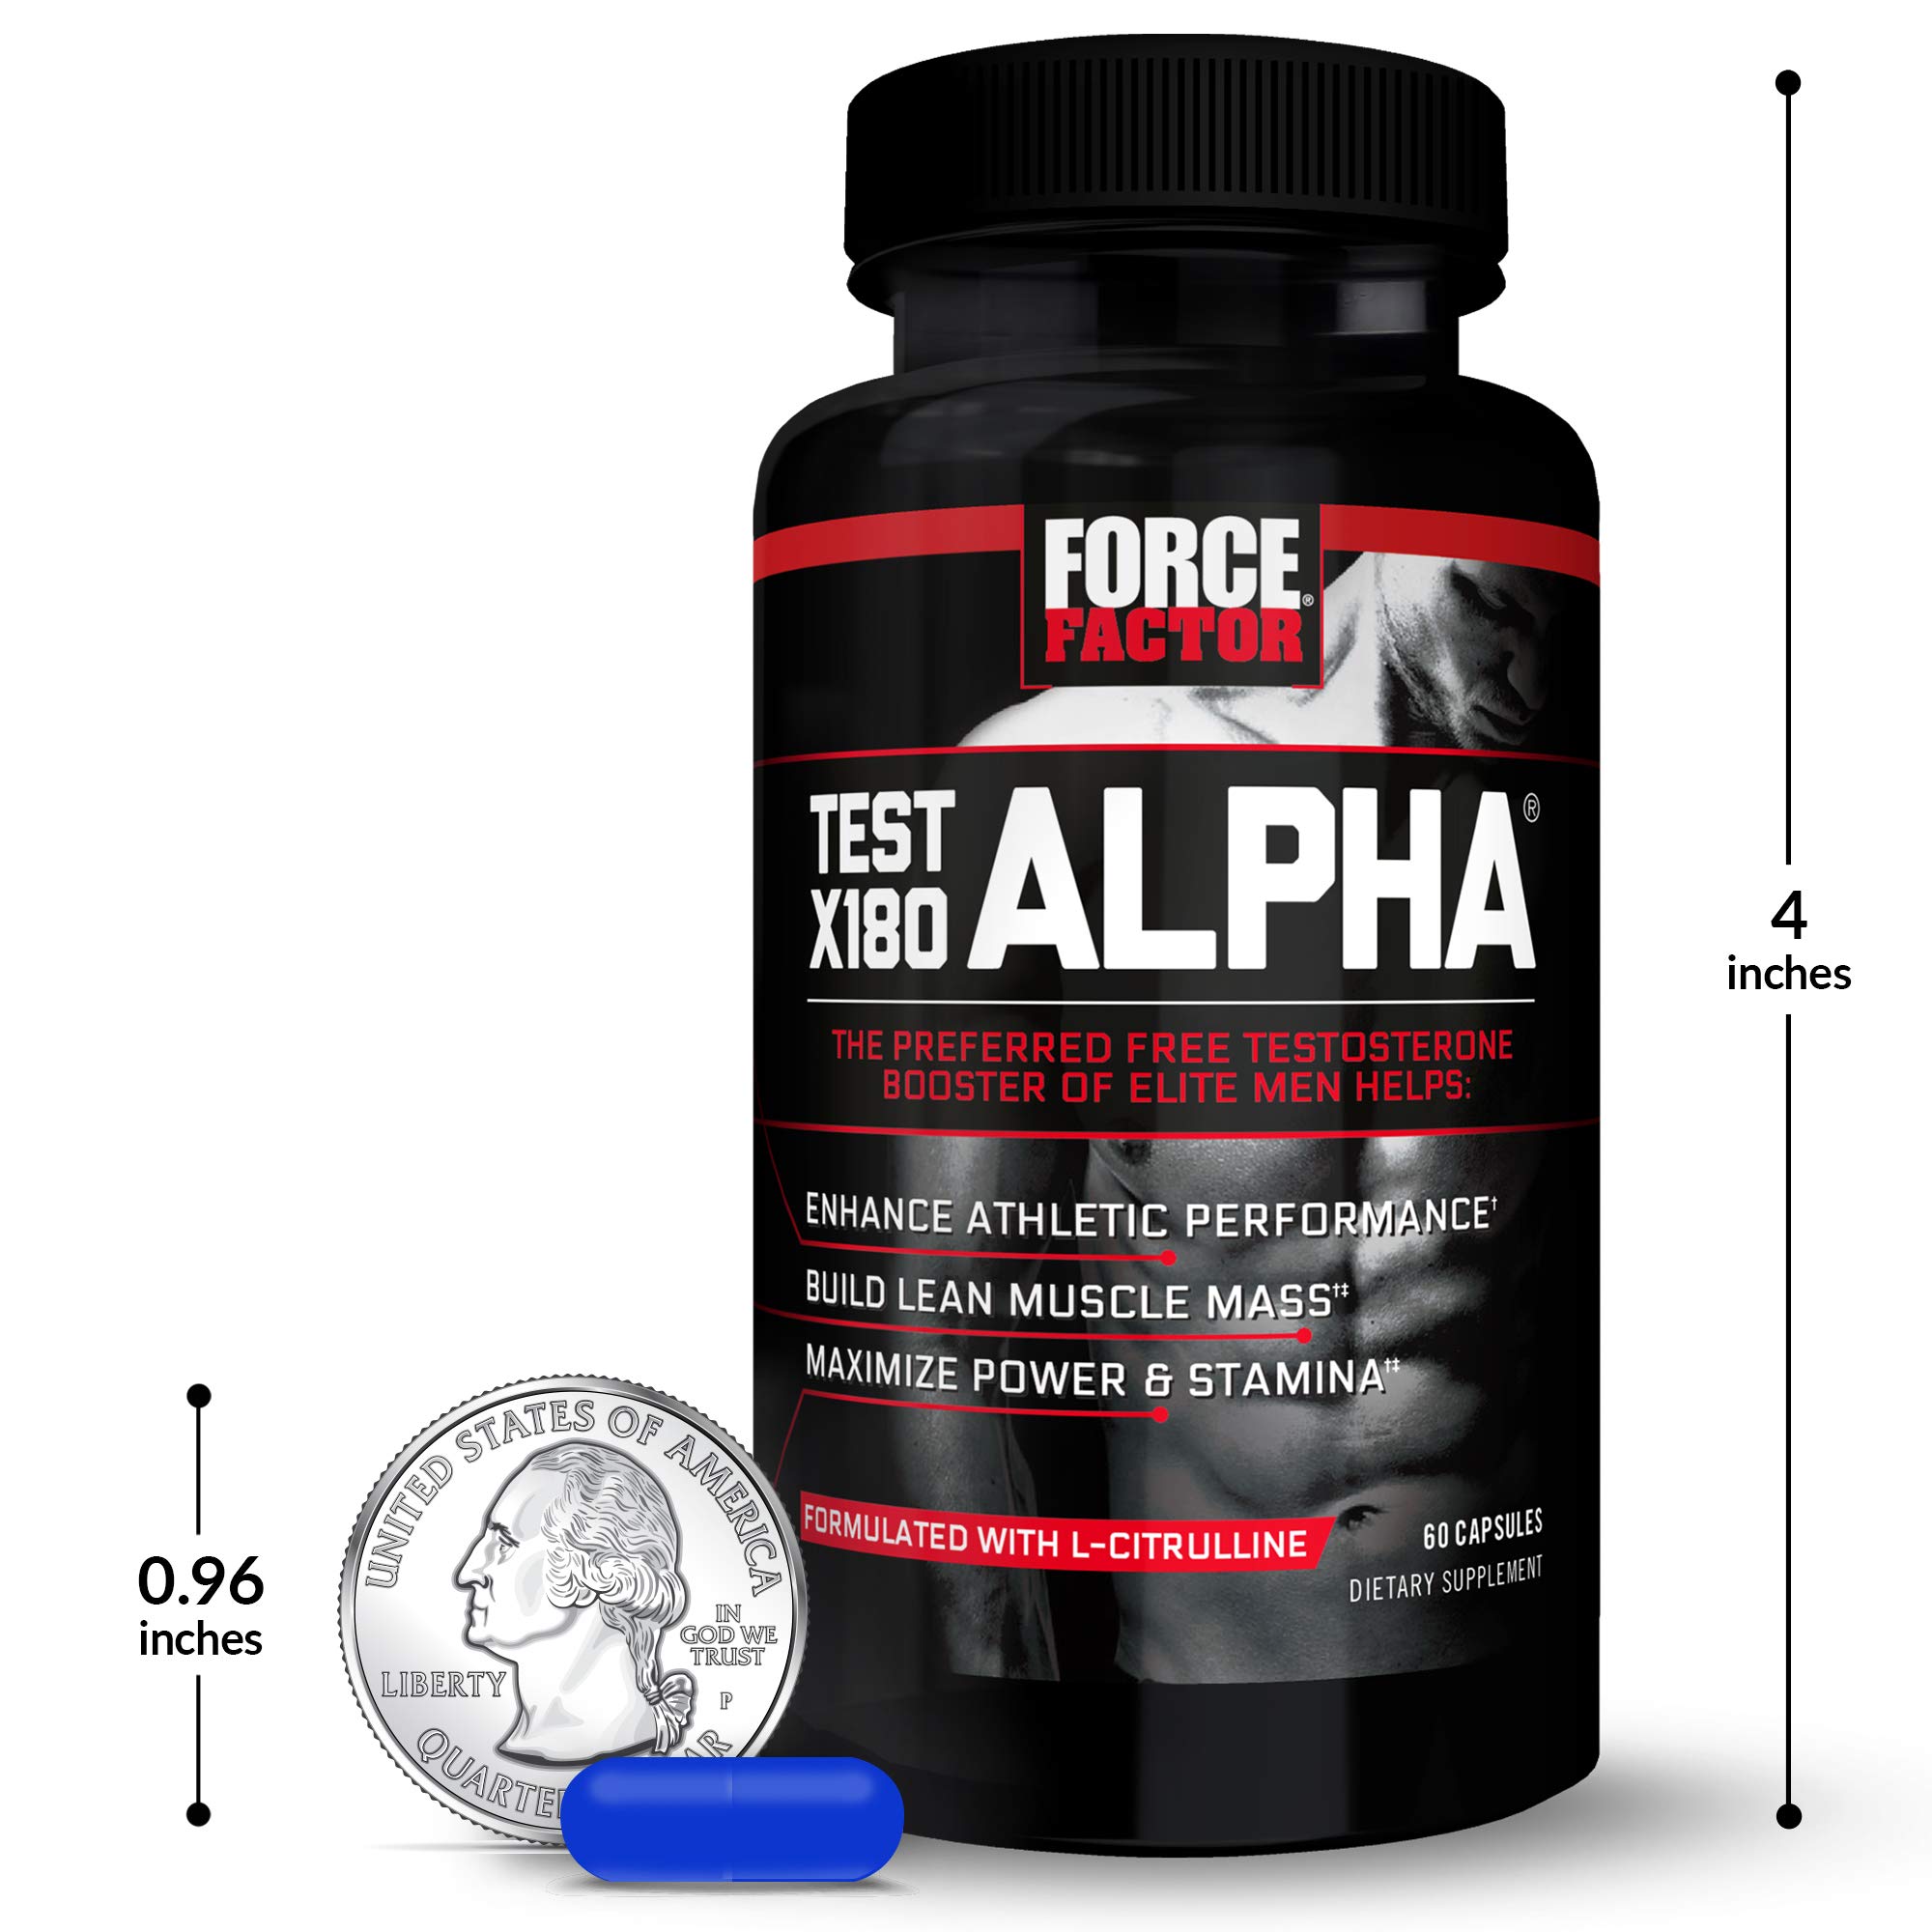 Force Factor Test X180 Alpha Total Testosterone Booster for Men with Fenugreek Seed and Maca Root to Increase Blood Flow, Build Lean Muscle, Improve Male Athletic Performance, 60 Capsules